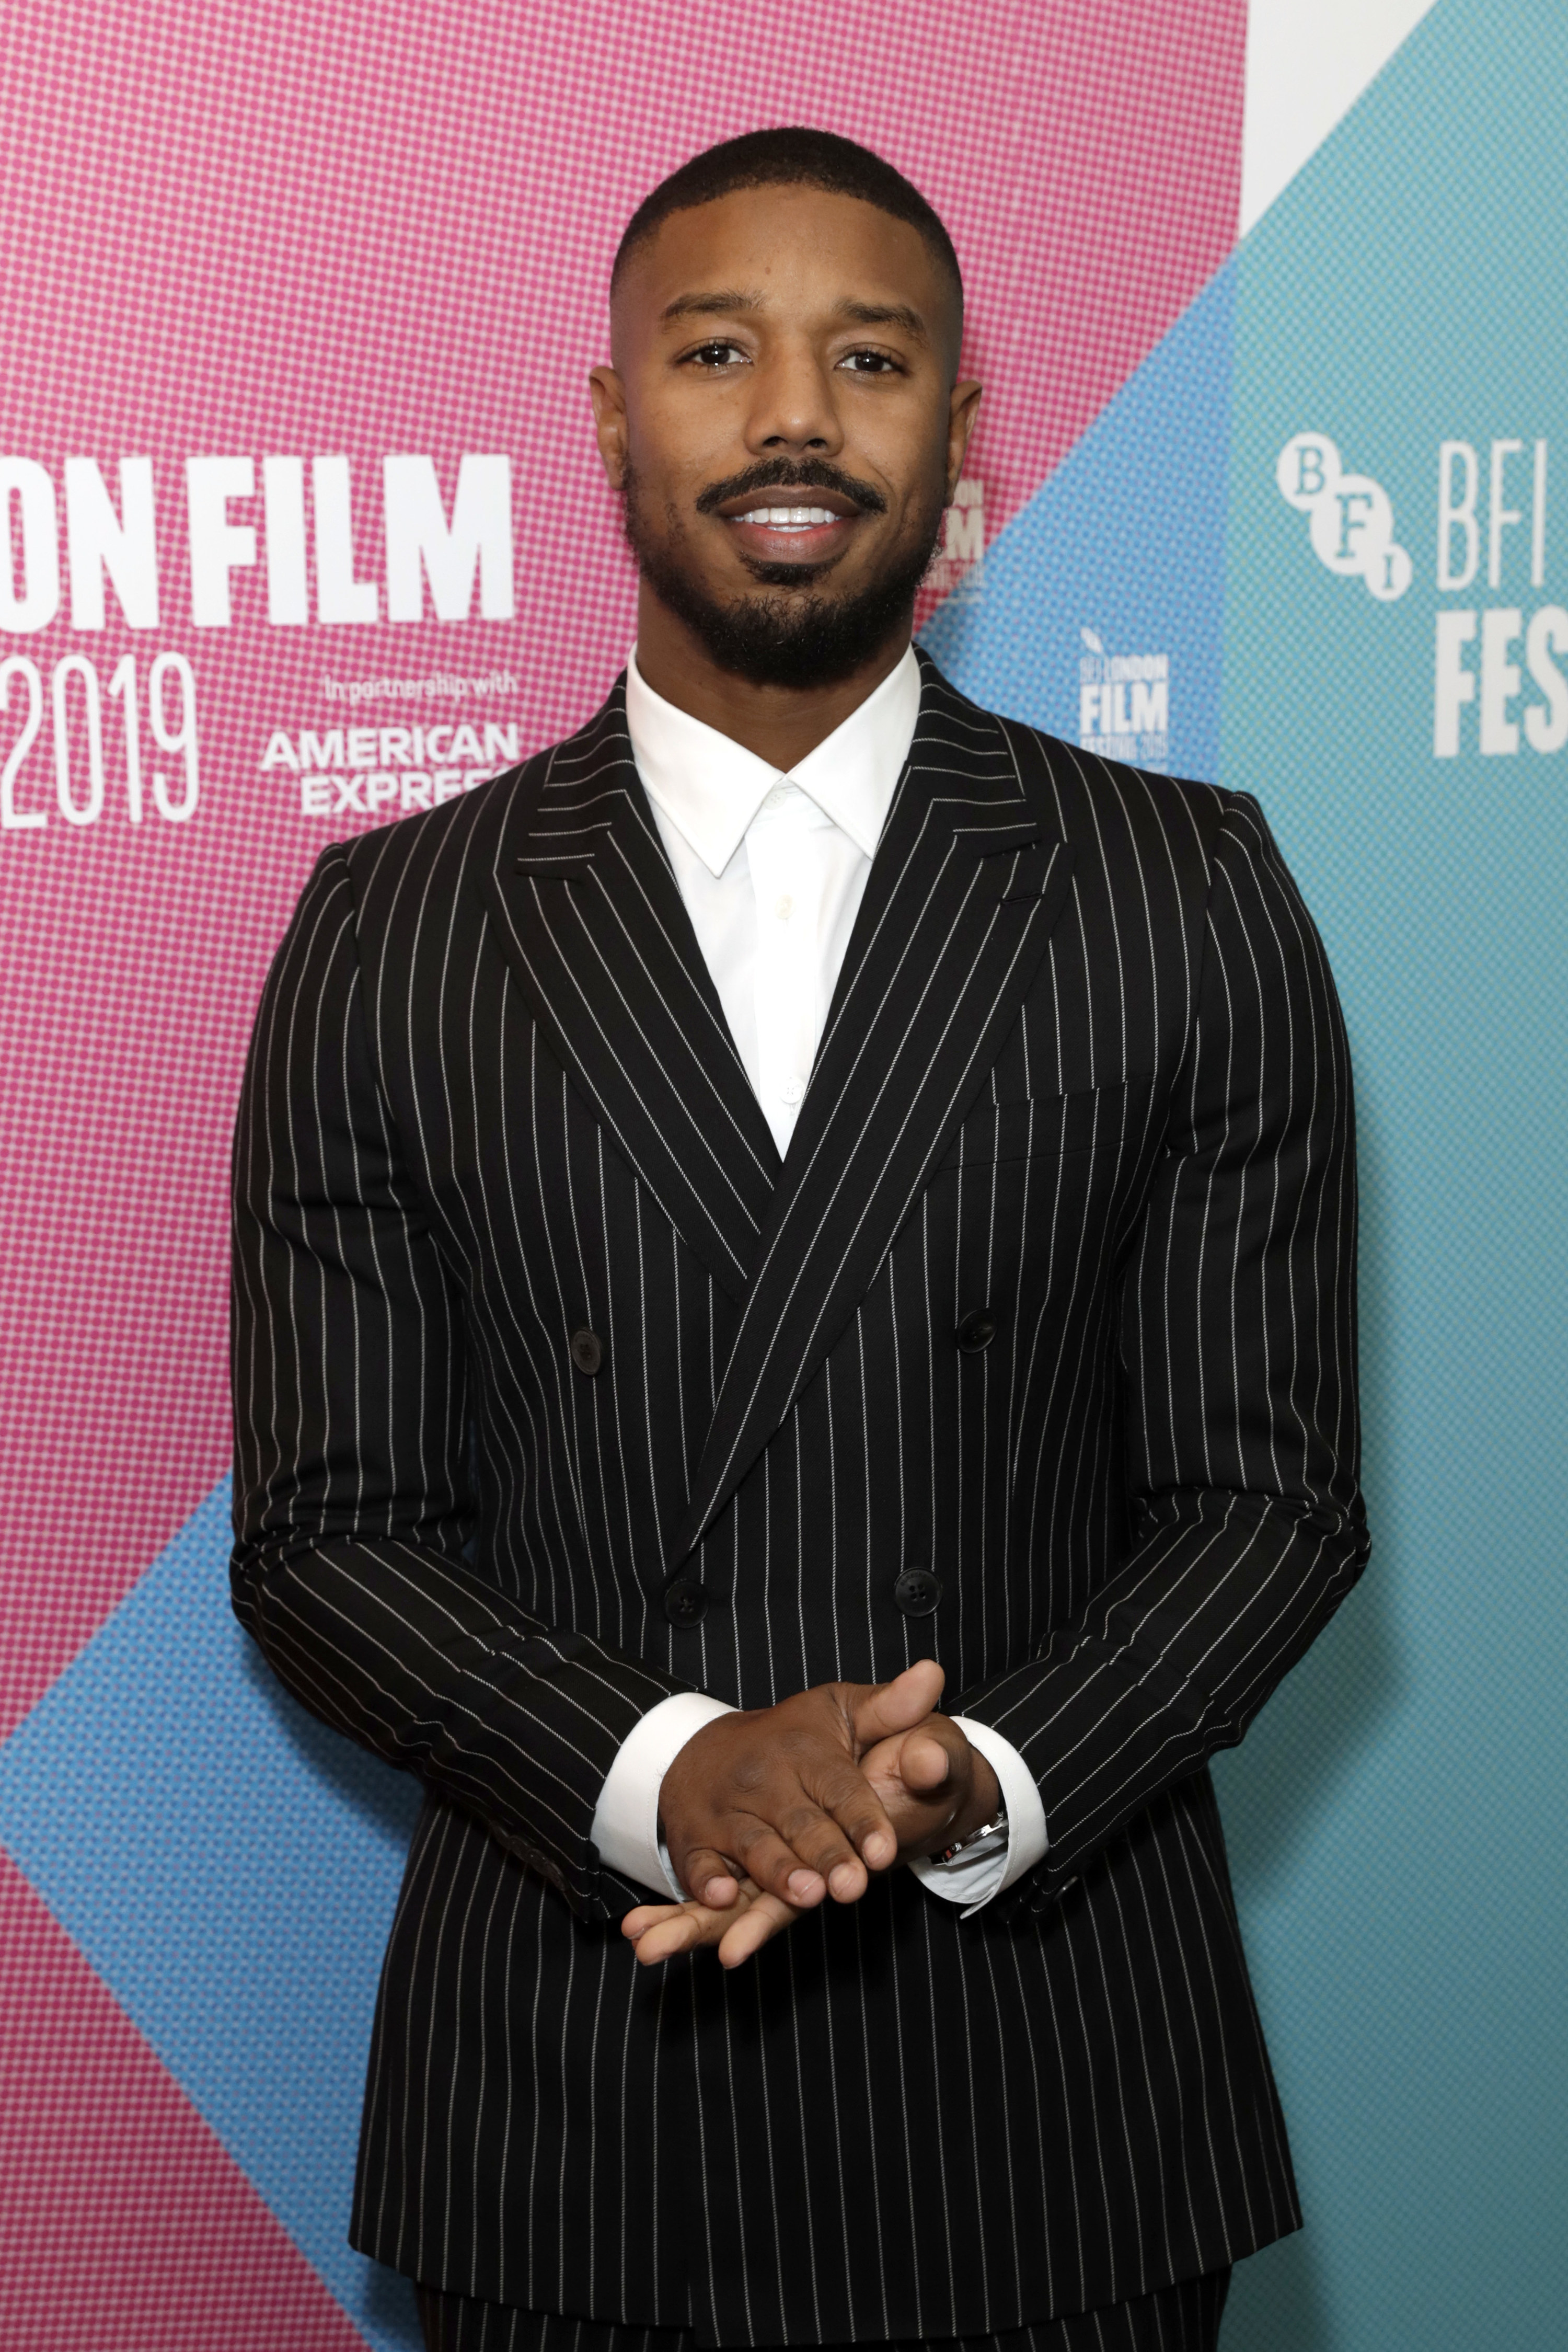 Michael B. Jordan Is Rumored To Be Dating Singer Snoh Aalegra, And Their Steamy New Video Doesn't Help